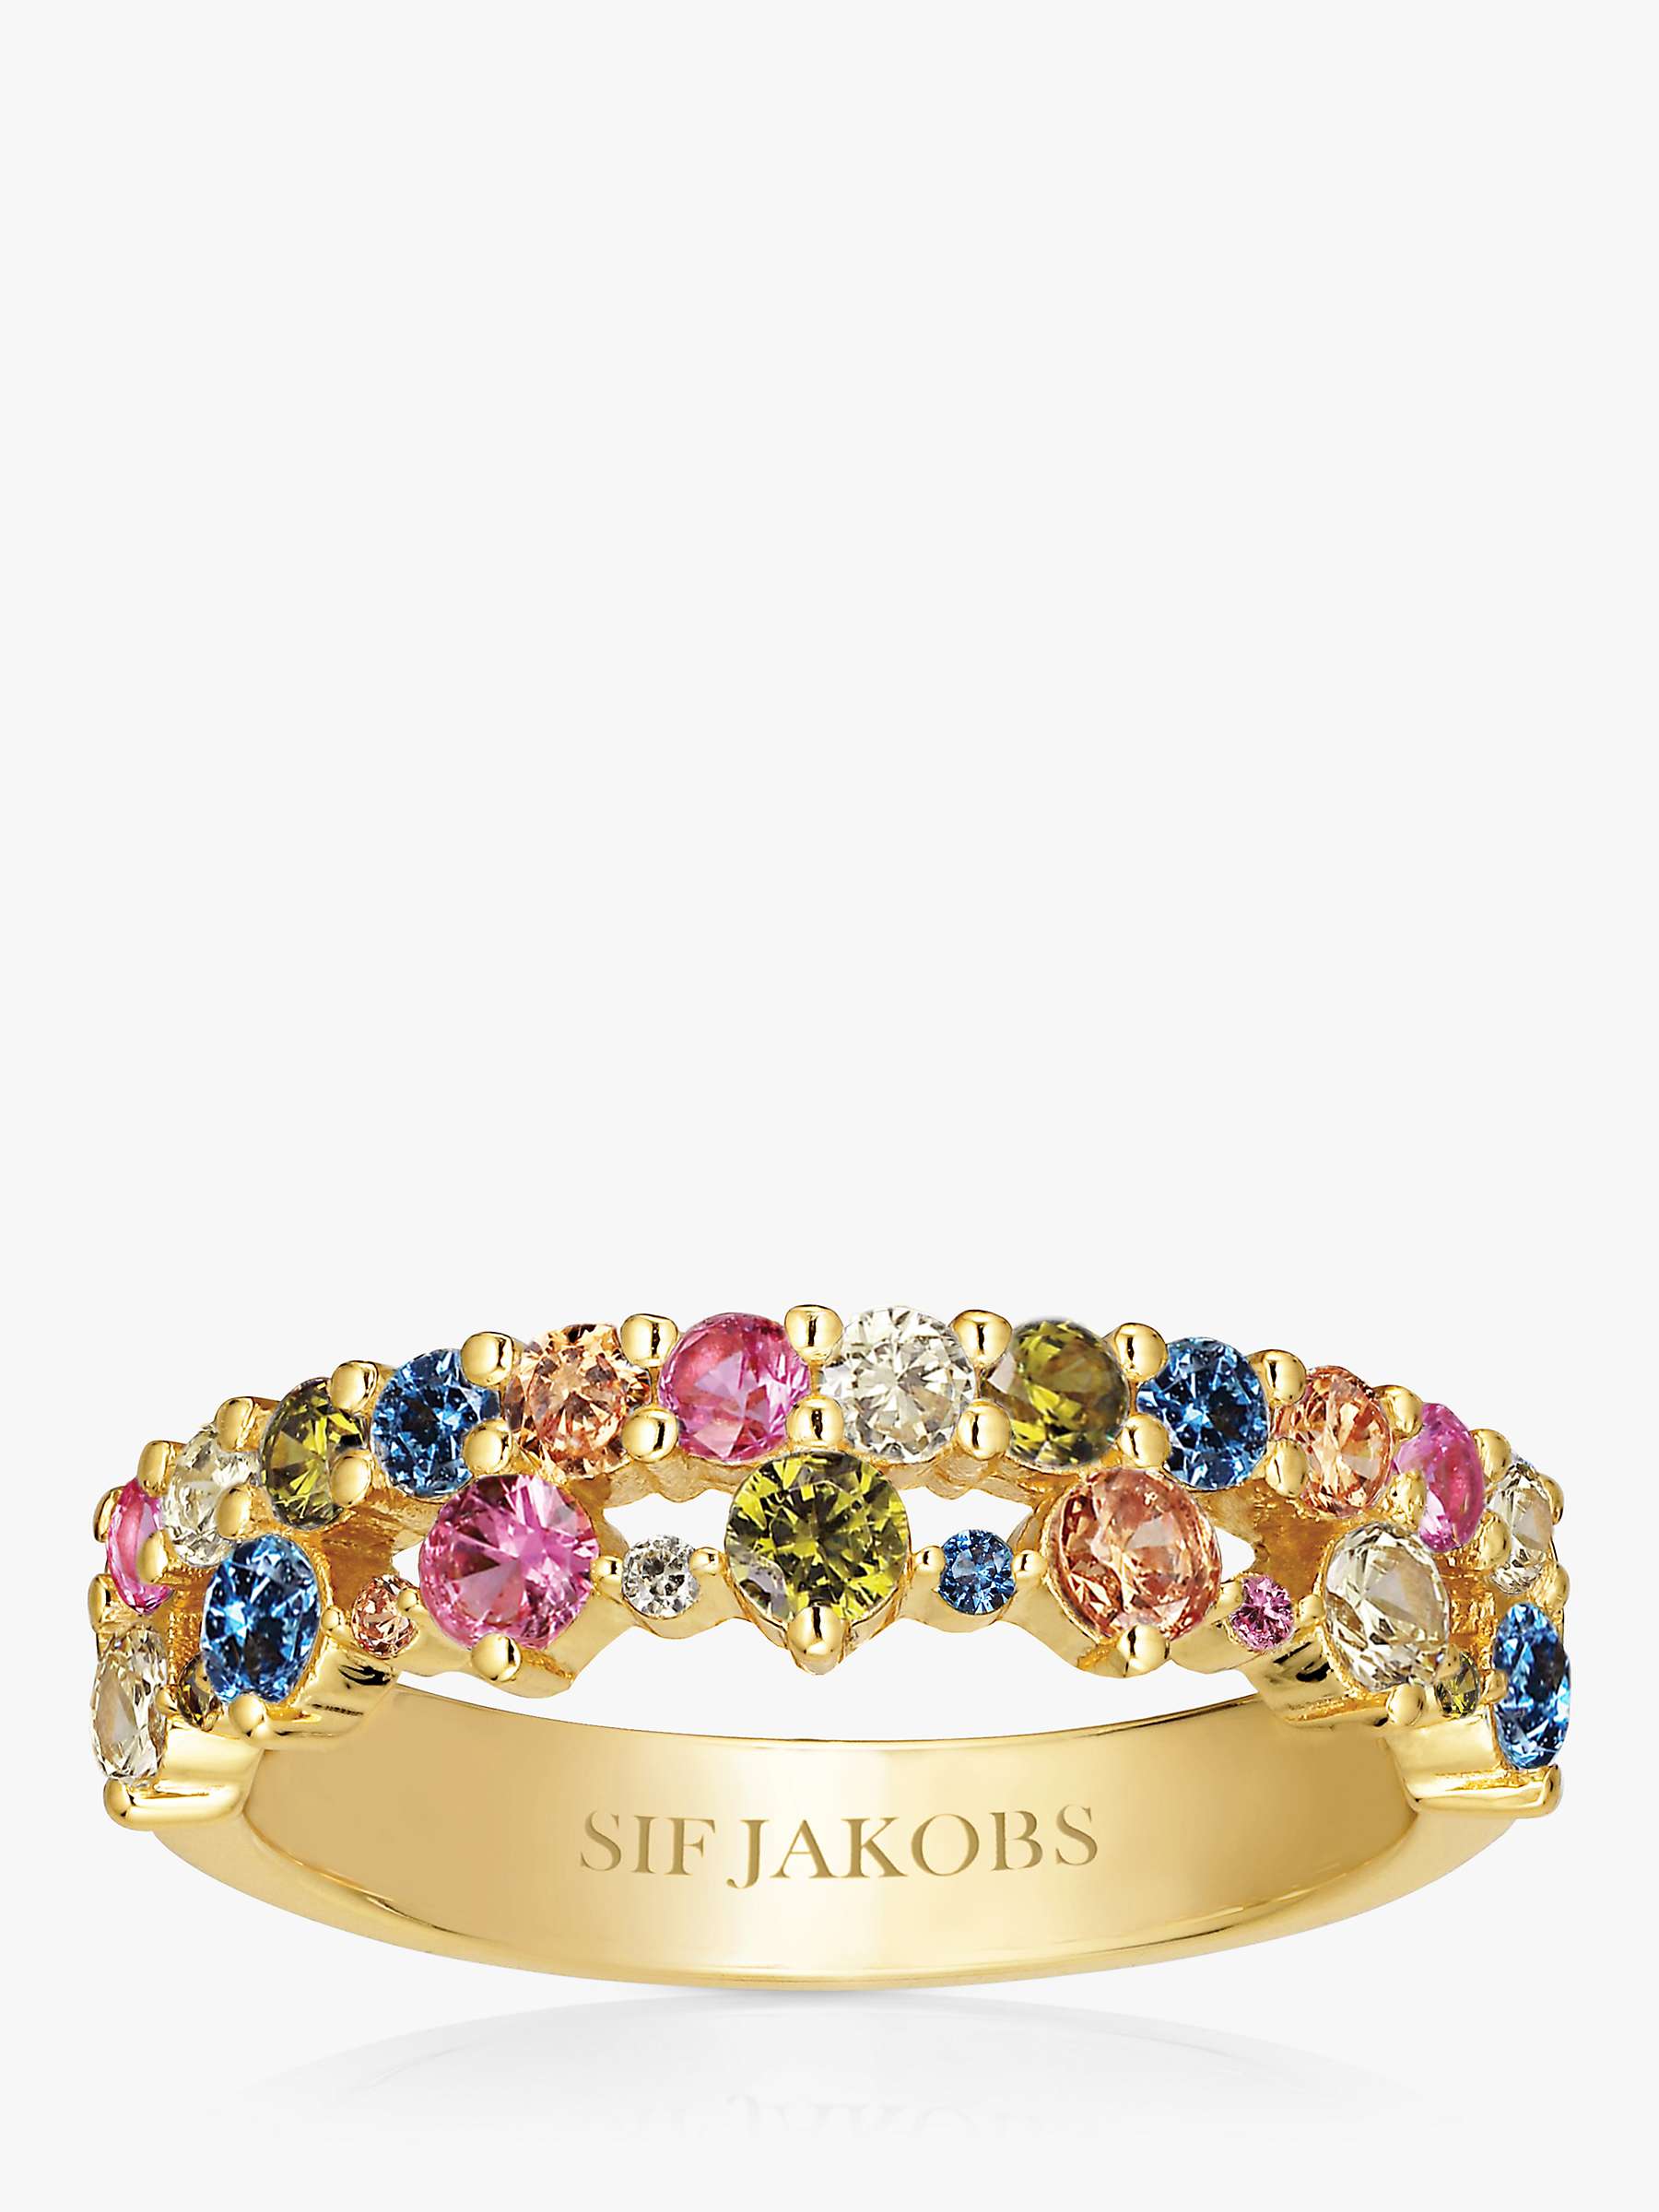 Buy Sif Jakobs Jewellery Double Row Zirconia Mix Ring, Gold Online at johnlewis.com